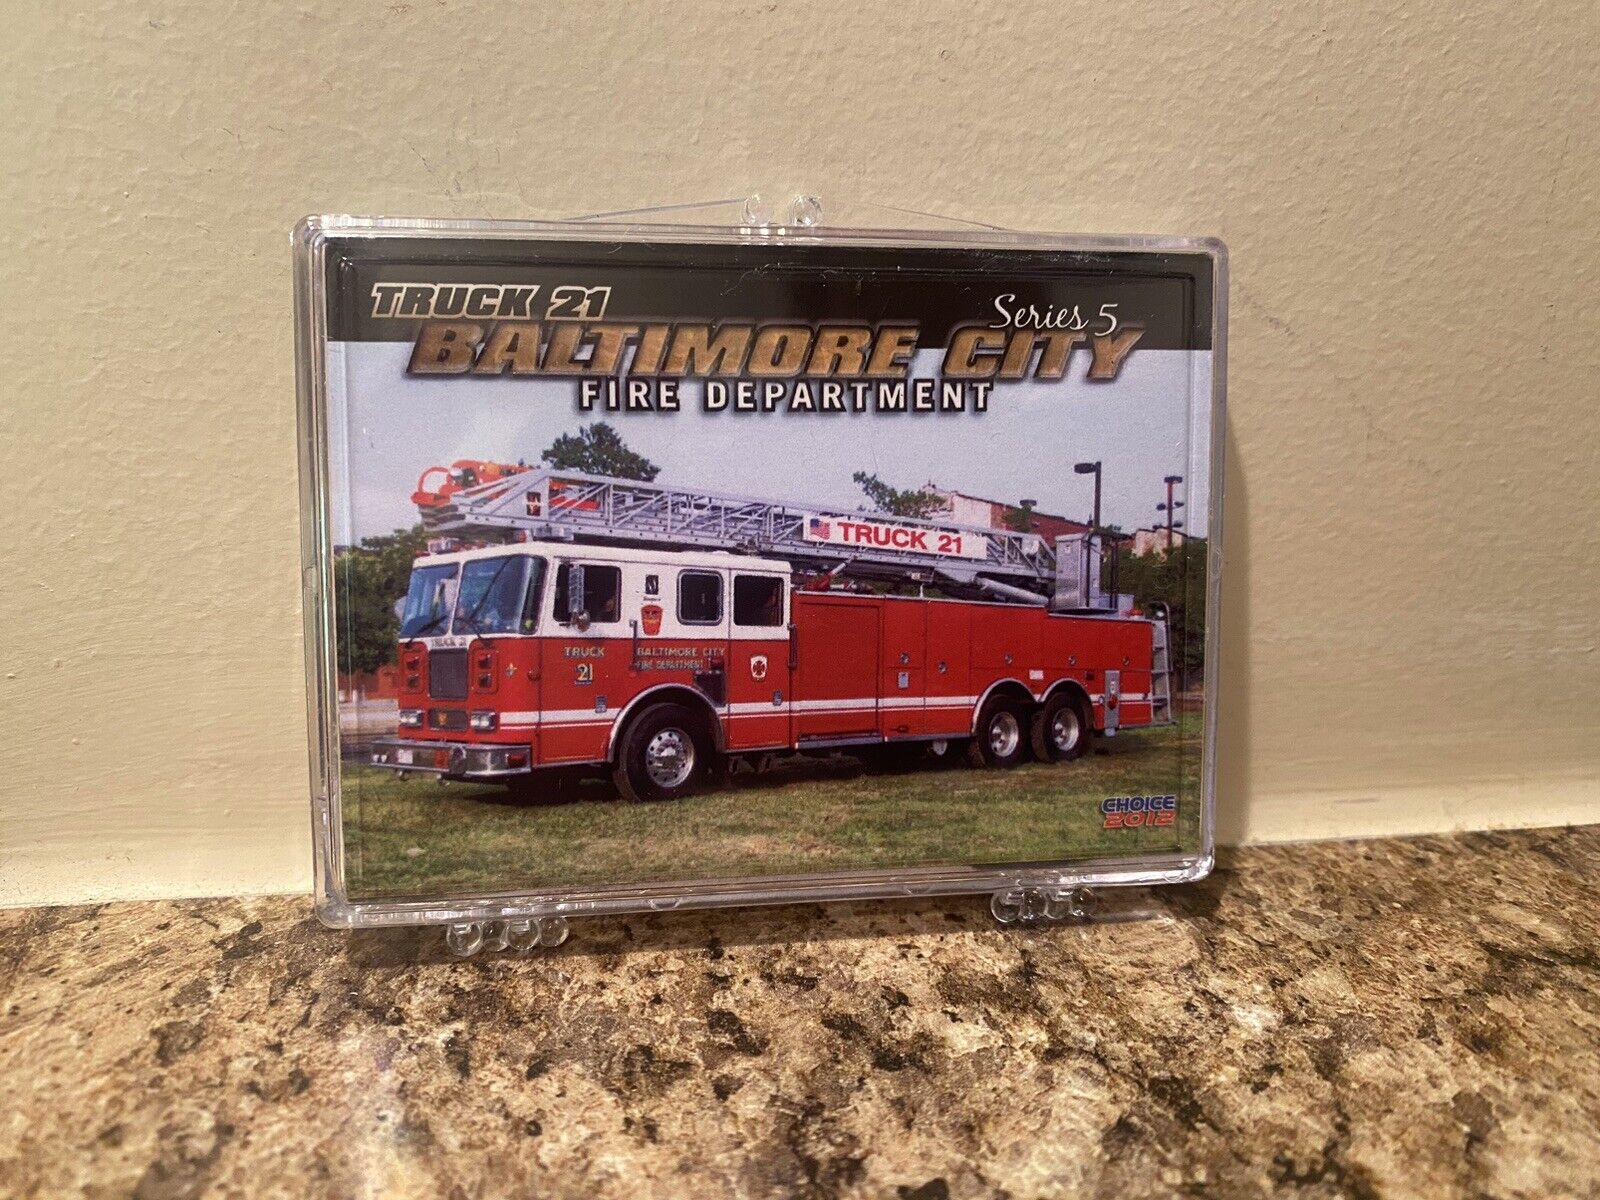 Choice SportsCards- Baltimore City Fire Department Series 5 2012